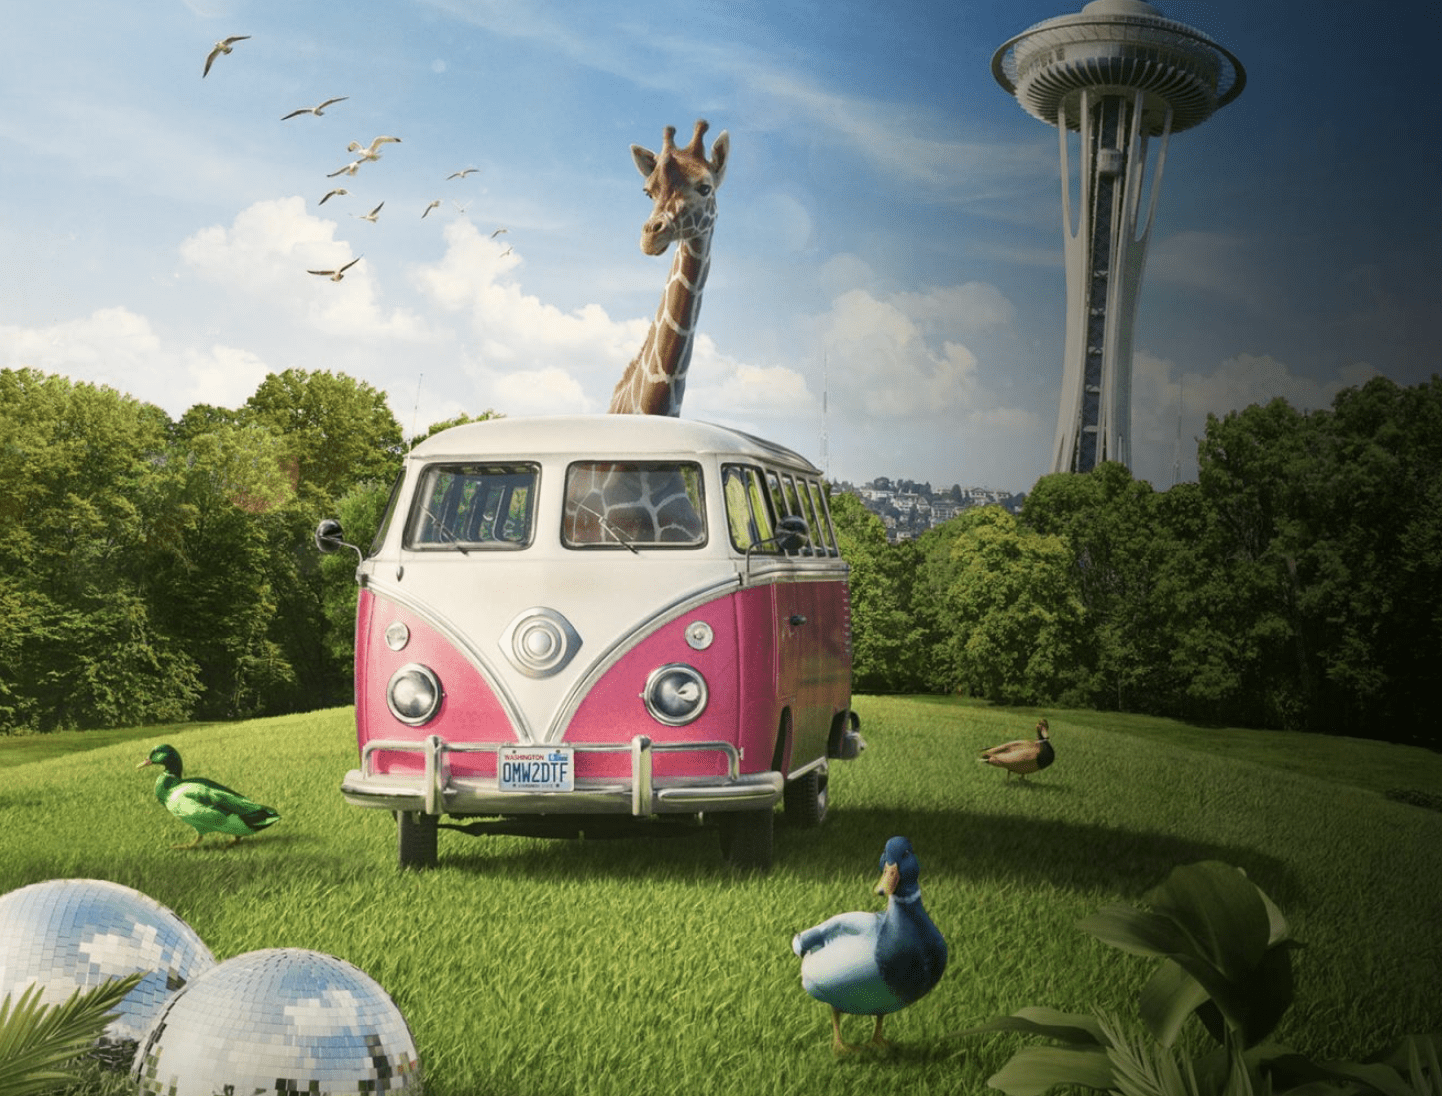 A giraffe driving a hippie van next to some ducks and disco balls in the Fischer Pavilion at the Seattle Center with the Space Needle in the background